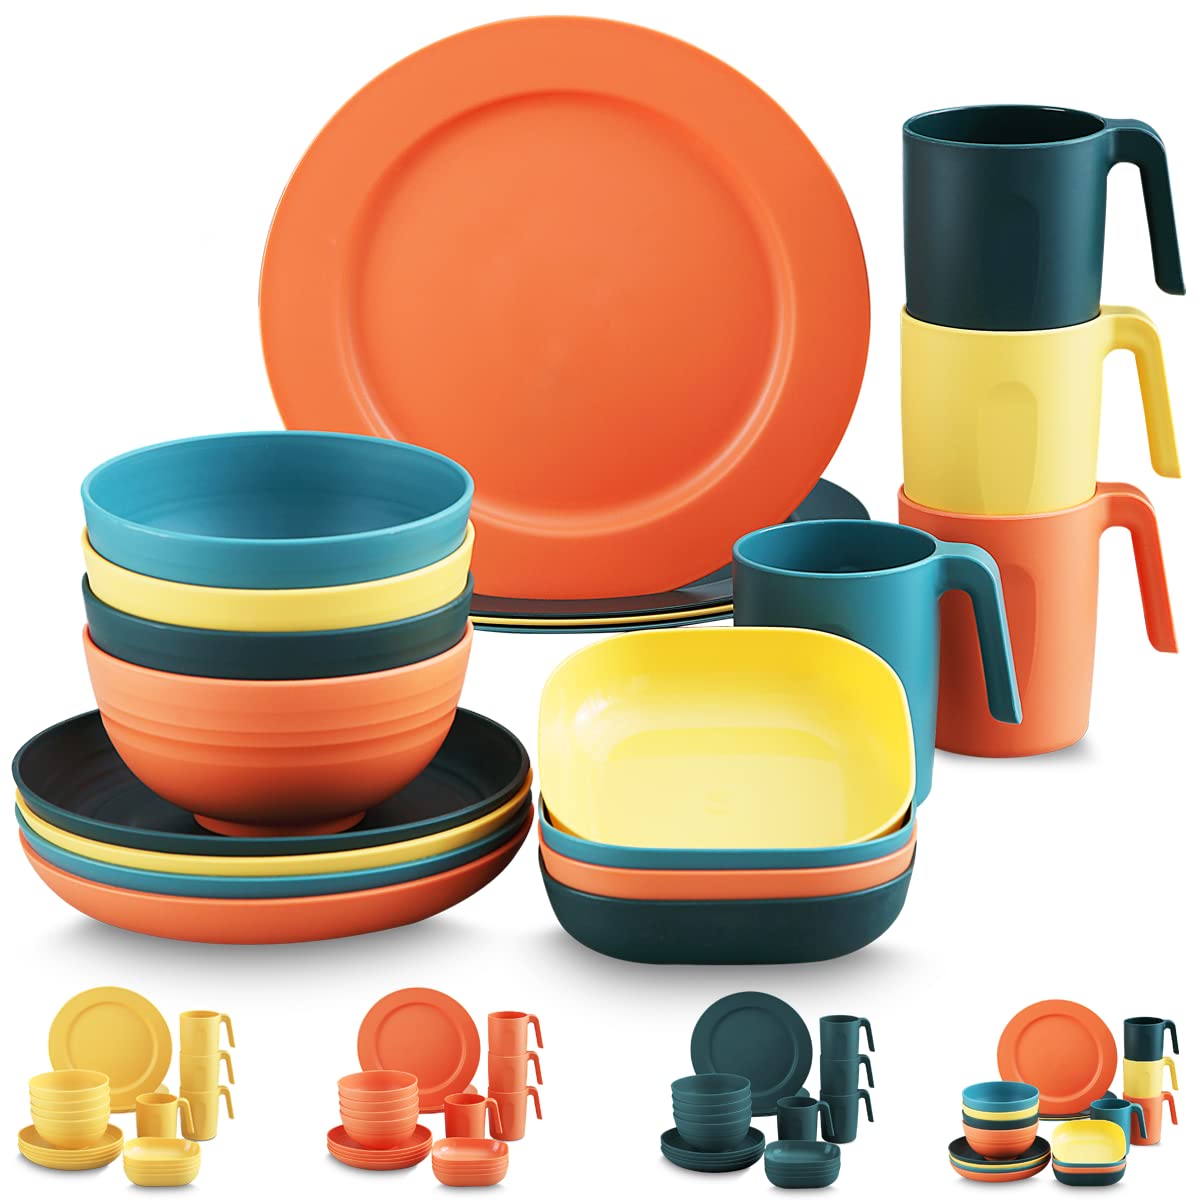 Kyraton Plastic Dinnerware Sets of 20 Pieces, Unbreakable And Reusable Light Weight Plates Mugs Bowls Dishes Easy to Carry And Clean Microwave Safe BPA Free Dishwasher Safe Service For 4 (Mutil Color)